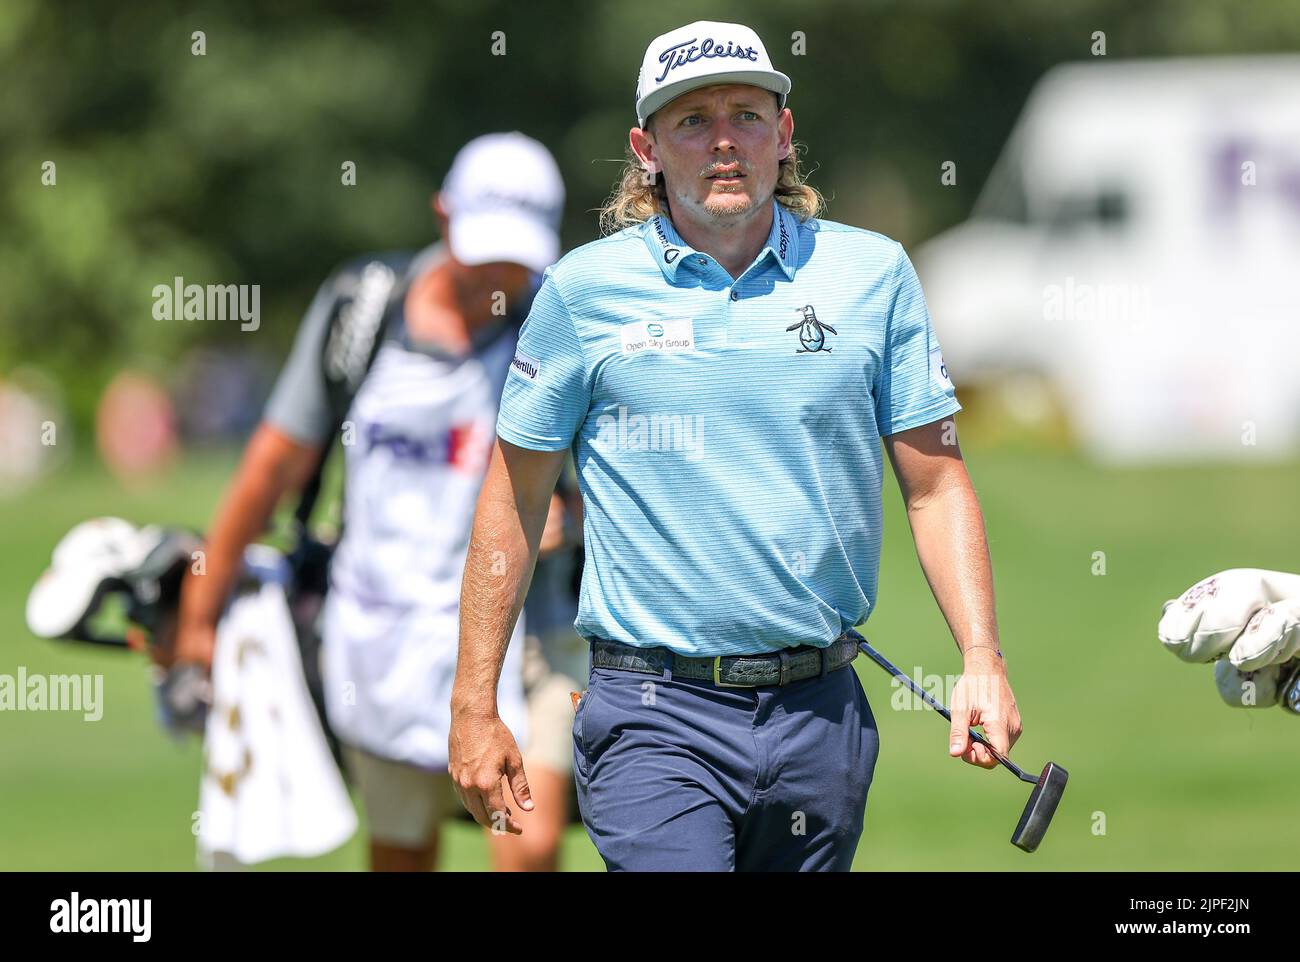 August 13, 2022: Cameron Smith approaches the 11th green during the third round of the FedEx St. Jude Championship golf tournament at TPC Southwind in Memphis, TN. Gray Siegel/Cal Sport Media/Sipa USA(Credit Image: © Gray Siegel/Cal Sport Media/Sipa USA) Stock Photo